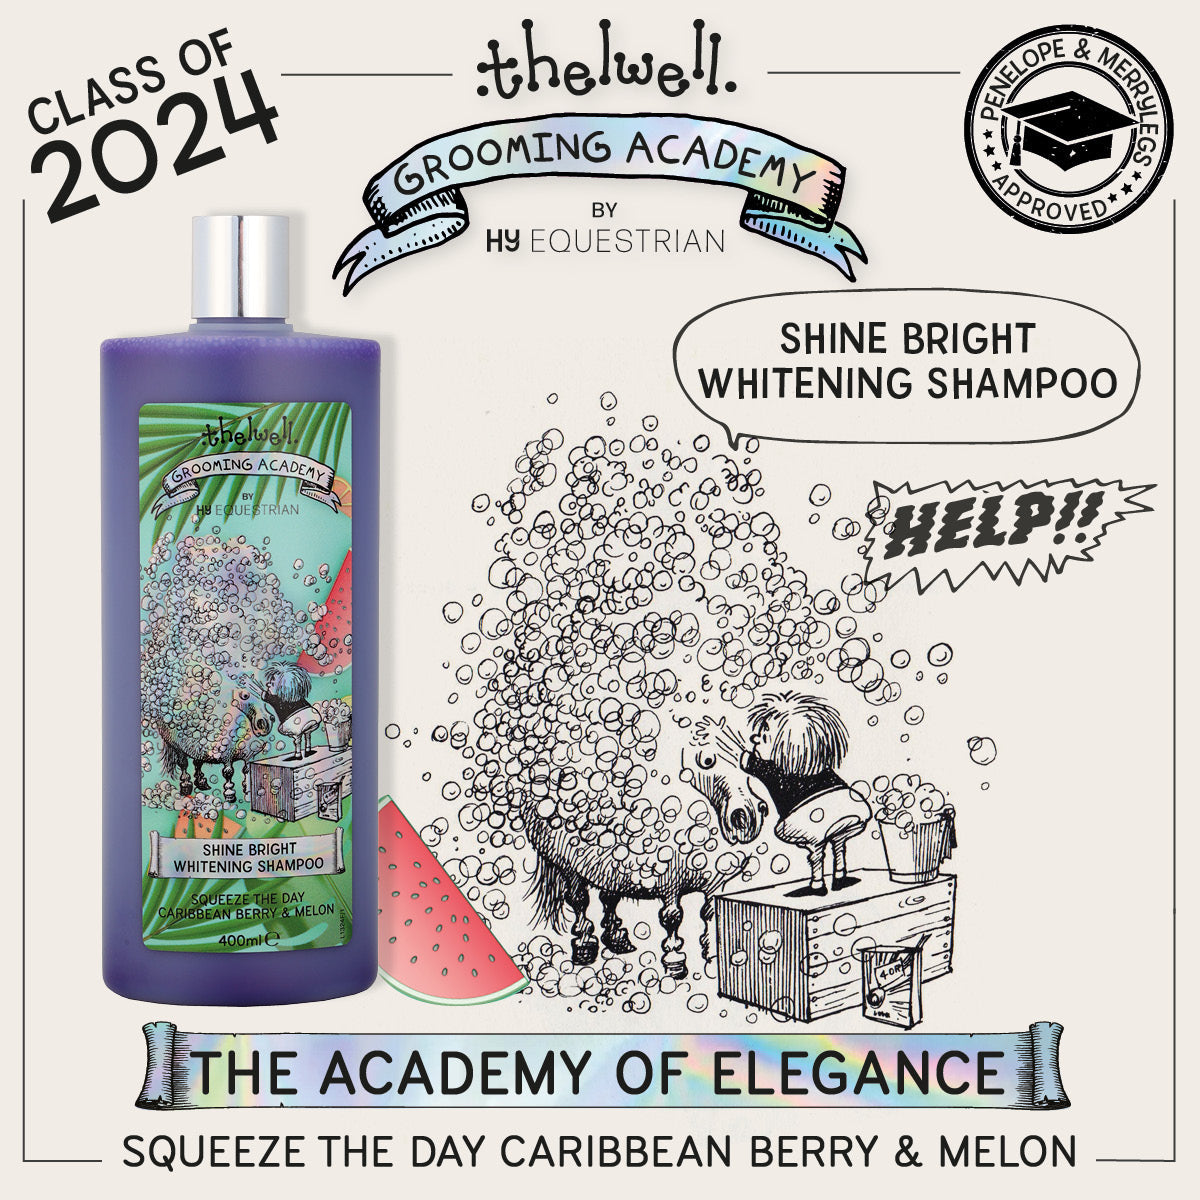 Thelwell Grooming Academy by Hy Equestrian - Shine Bright Whitening Shampoo